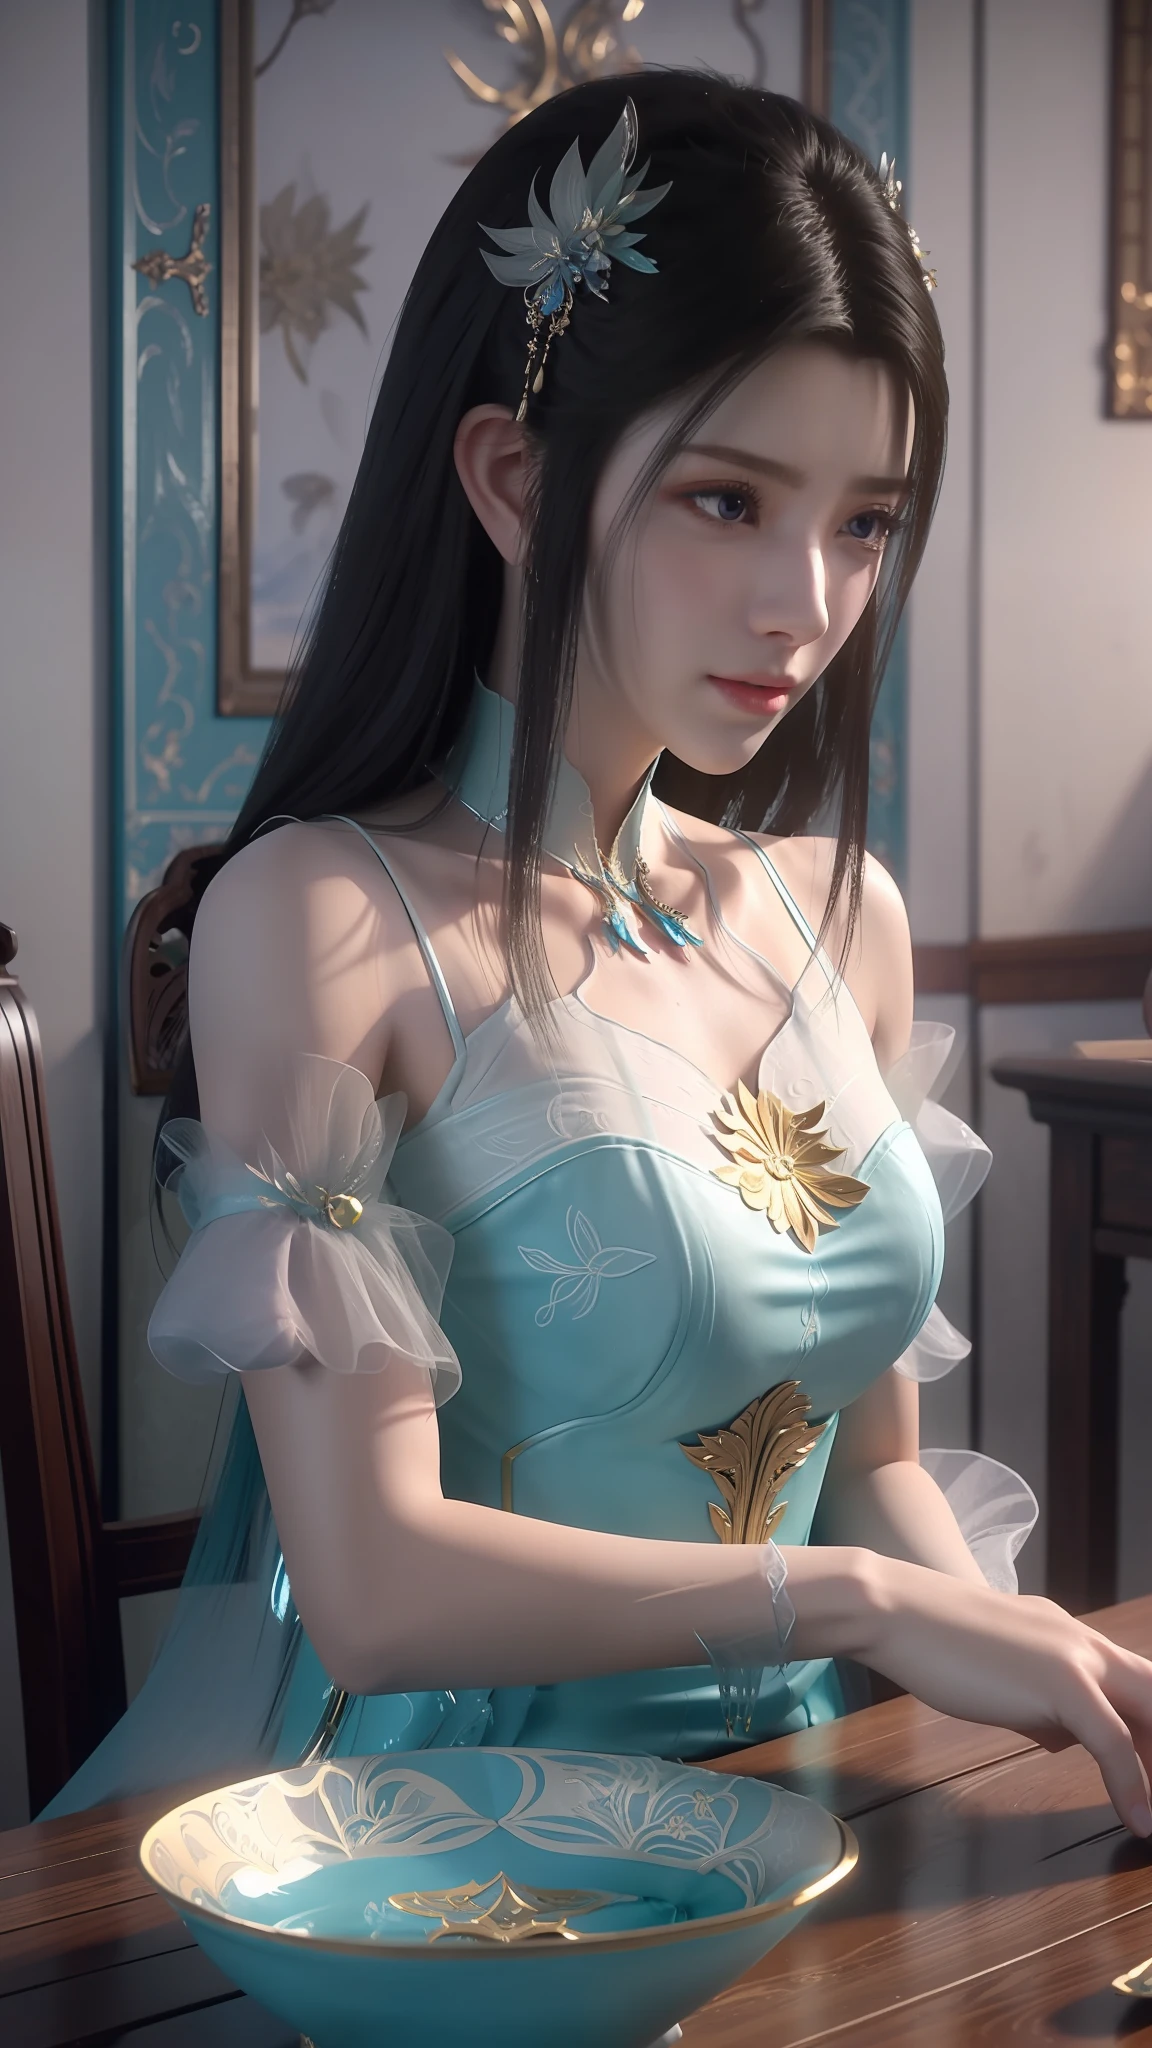 The Arad woman in a blue dress sits at the table, closeup fantasy with water magic, 2. 5 D CGI anime fantasy artwork, Anime fantasy illustration, Detailed digital anime art, beautiful fantasy anime, Smooth anime CG art, Anime fantasy artwork, 8K high quality detailed art, Realistic anime 3 D style, ultra detailed water, beautiful and seductive anime woman